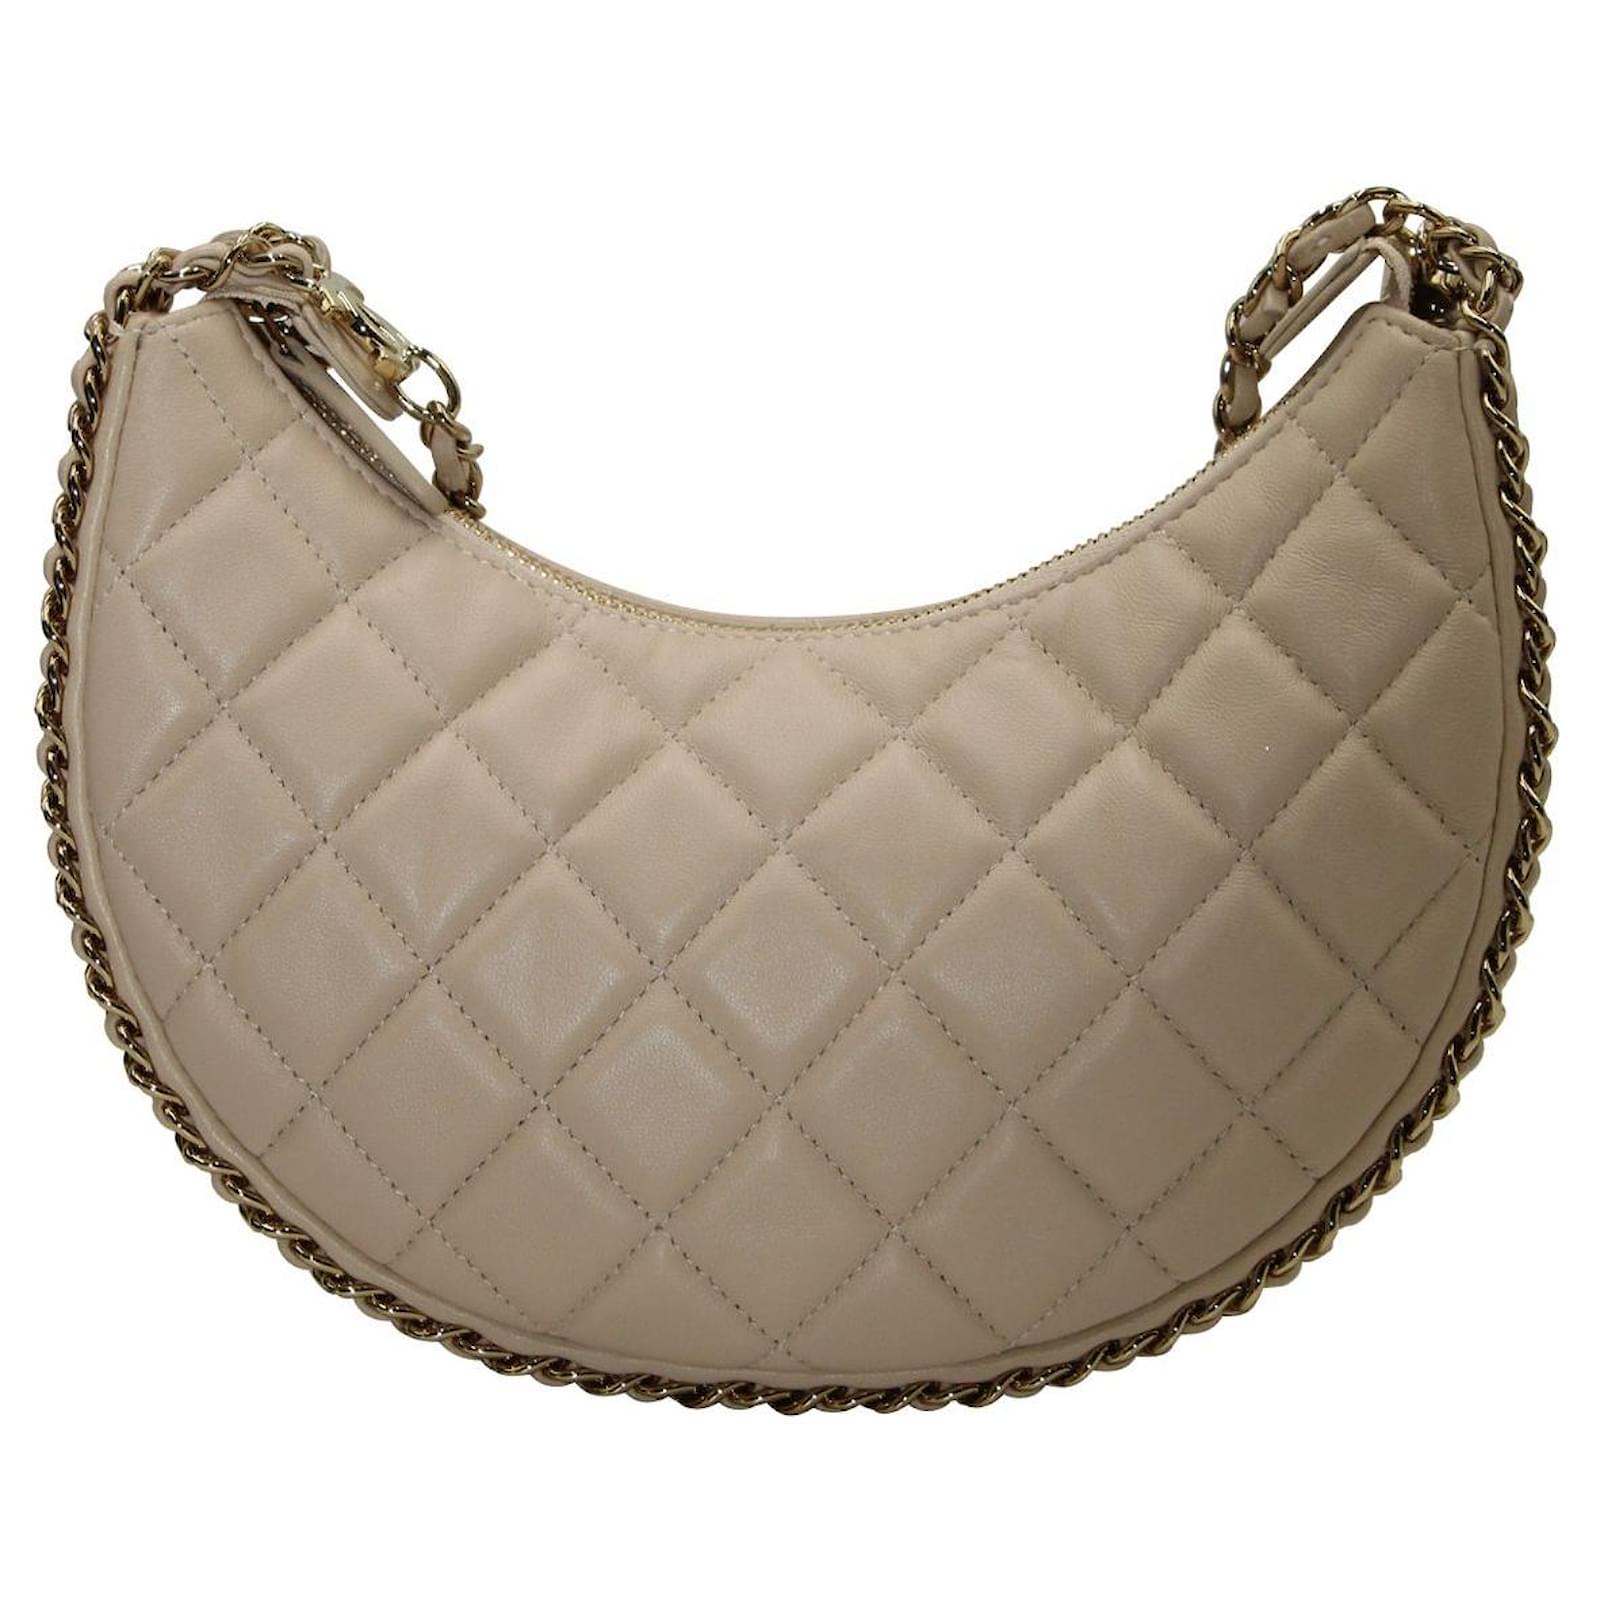 Handbags Chanel Chanel Moon Small Hobo Bag in Beige Leather Size Unique Inter